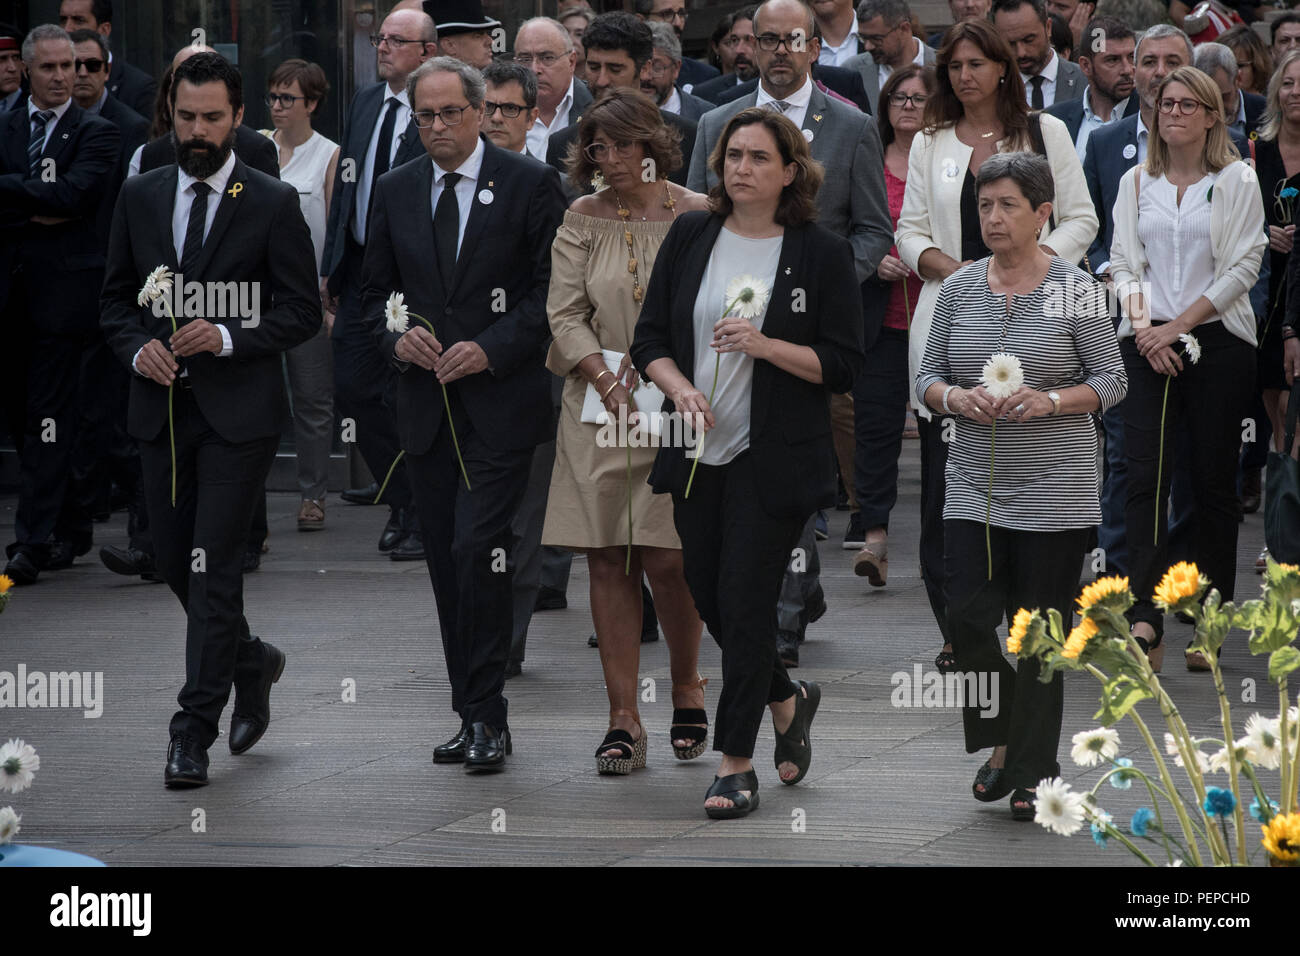 Barcelona, Catalonia, Spain. 17th Aug, 2018. Local authorities Roger Torrent, President of the Parliament of Catalonia, Quim Torra President of Catalonia, Ada Colau, Barcelona's Mayor and Teresa Cunillera, Spain's Governemnt delegate in Catalonia pay tribute in Las Ramblas of Barcelona after one year of the terror attacks that killed 16 people and injured more than 120 when two vehicles crashed into the crowds. Credit: Jordi Boixareu/ZUMA Wire/Alamy Live News Stock Photo